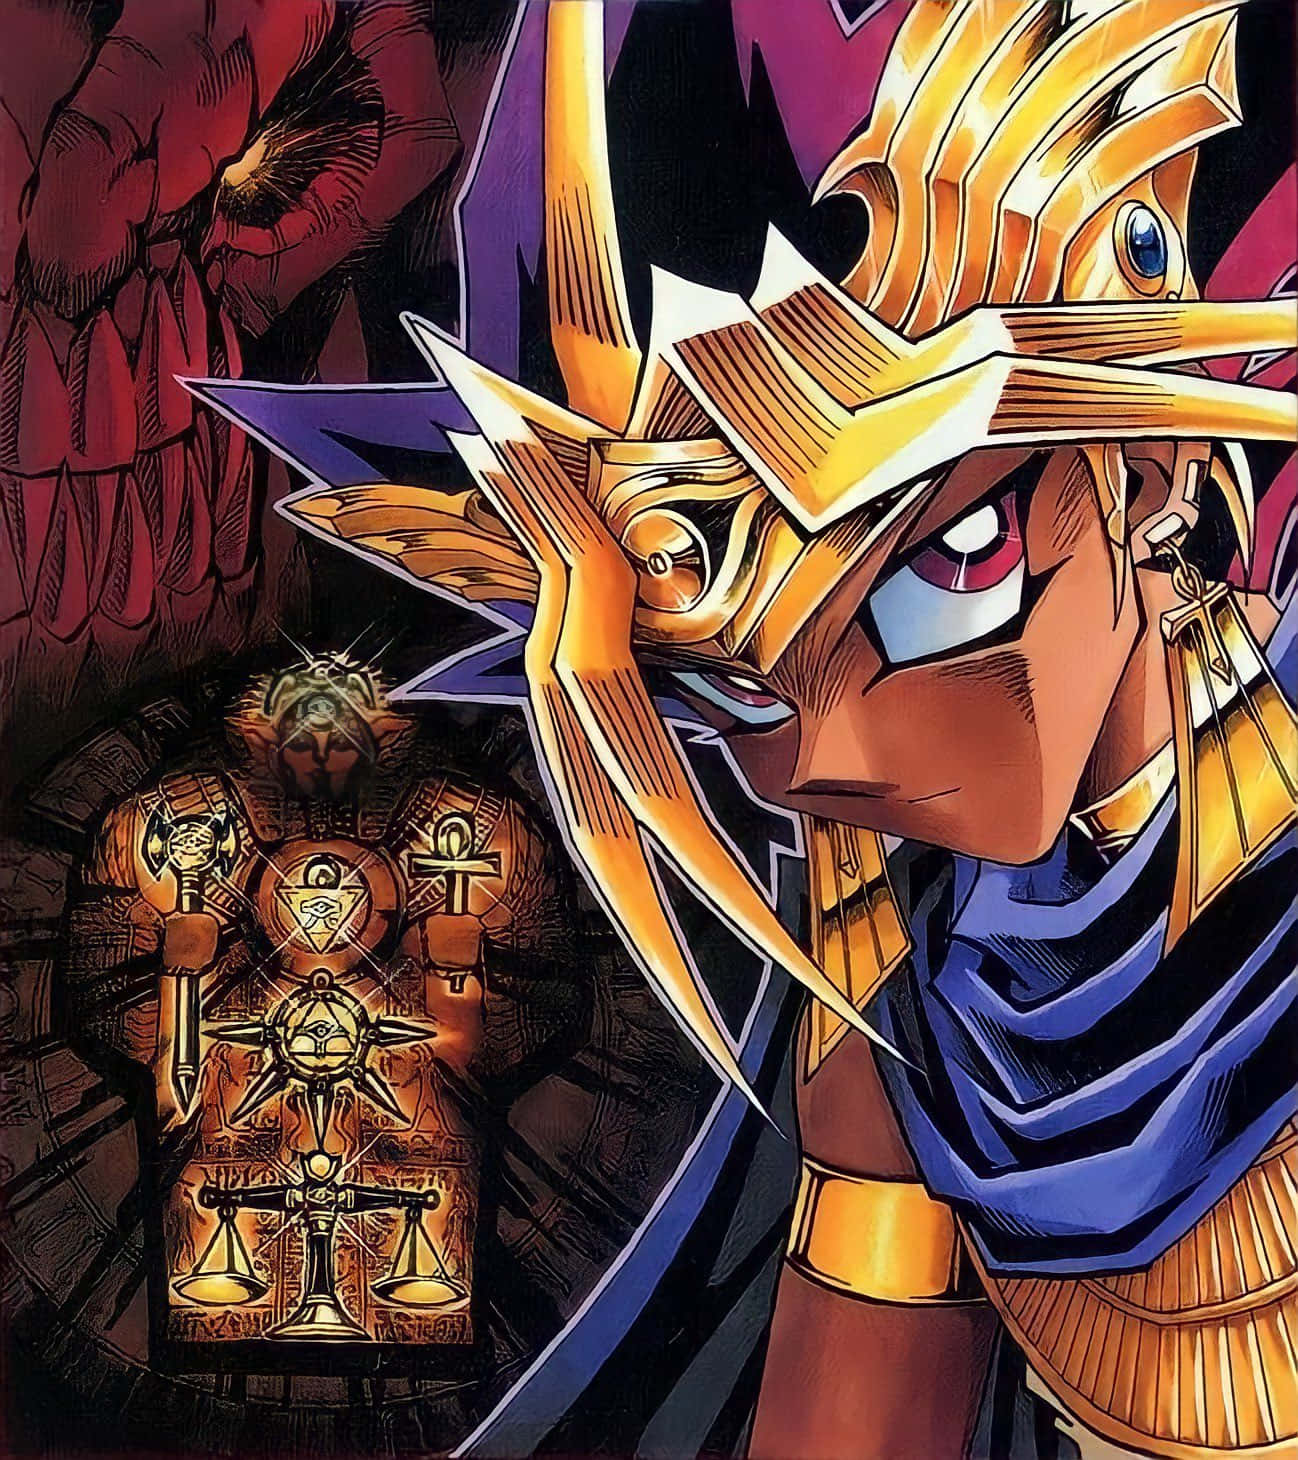 The mighty Pharaoh Atem, ruler of ancient Egypt, displaying his regal demeanor and mystical powers. Wallpaper